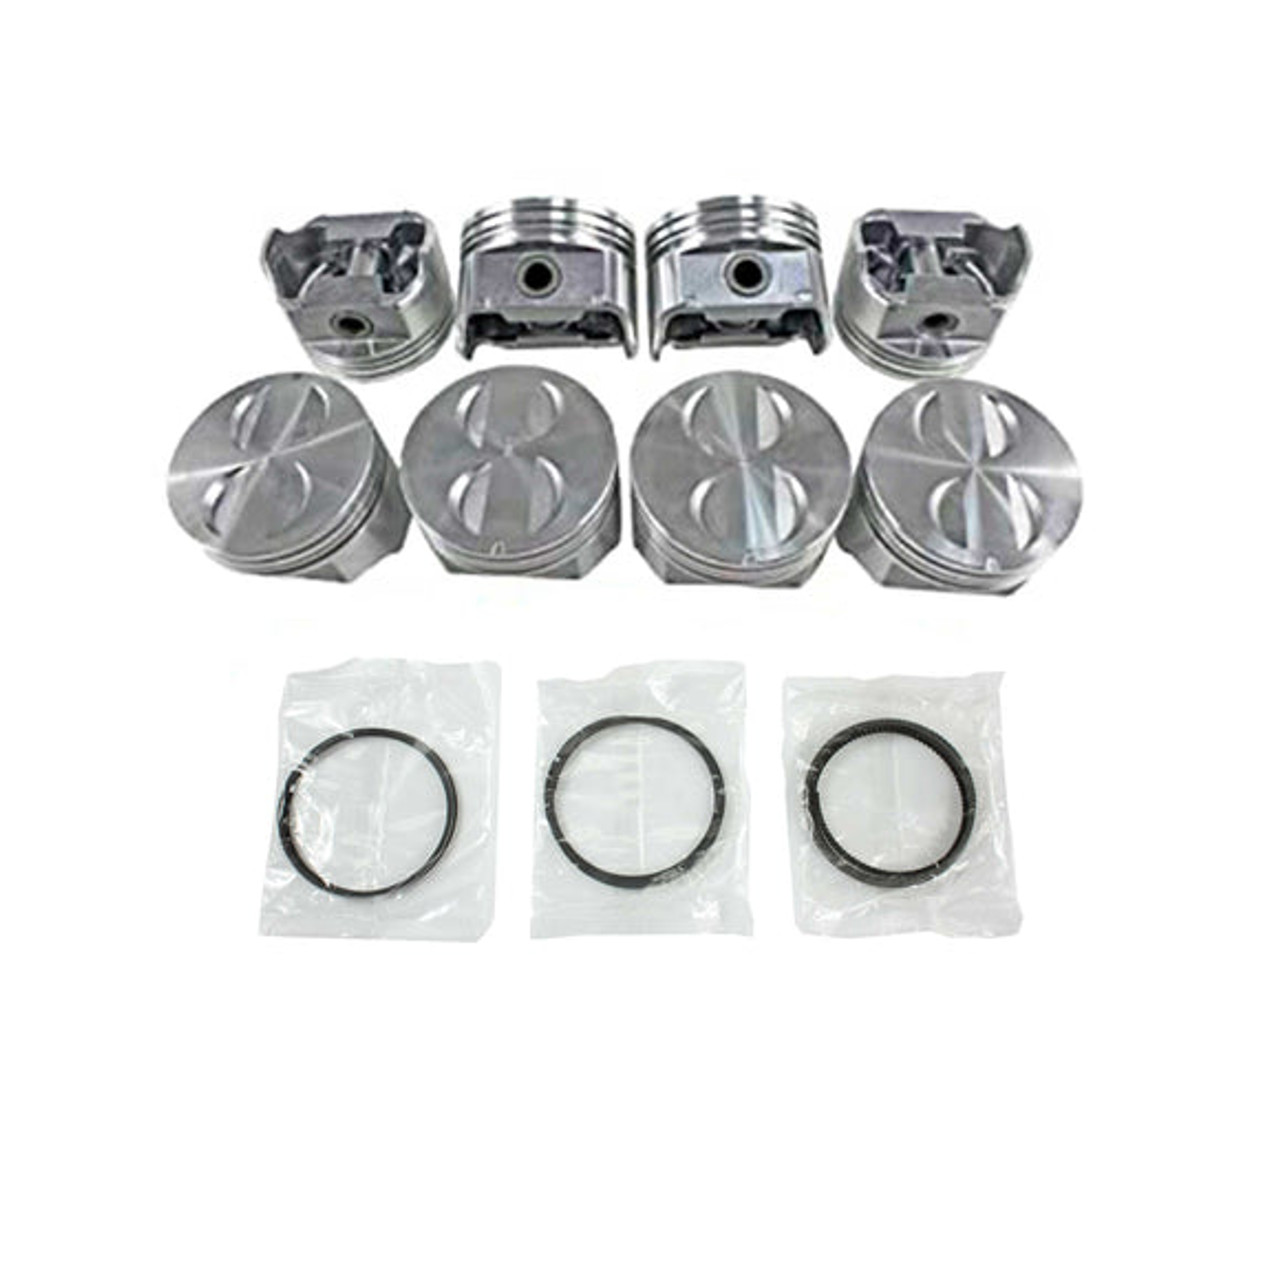 Piston Set with Rings - 2008 Cadillac STS 3.6L Engine Parts # PRK3212ZE31